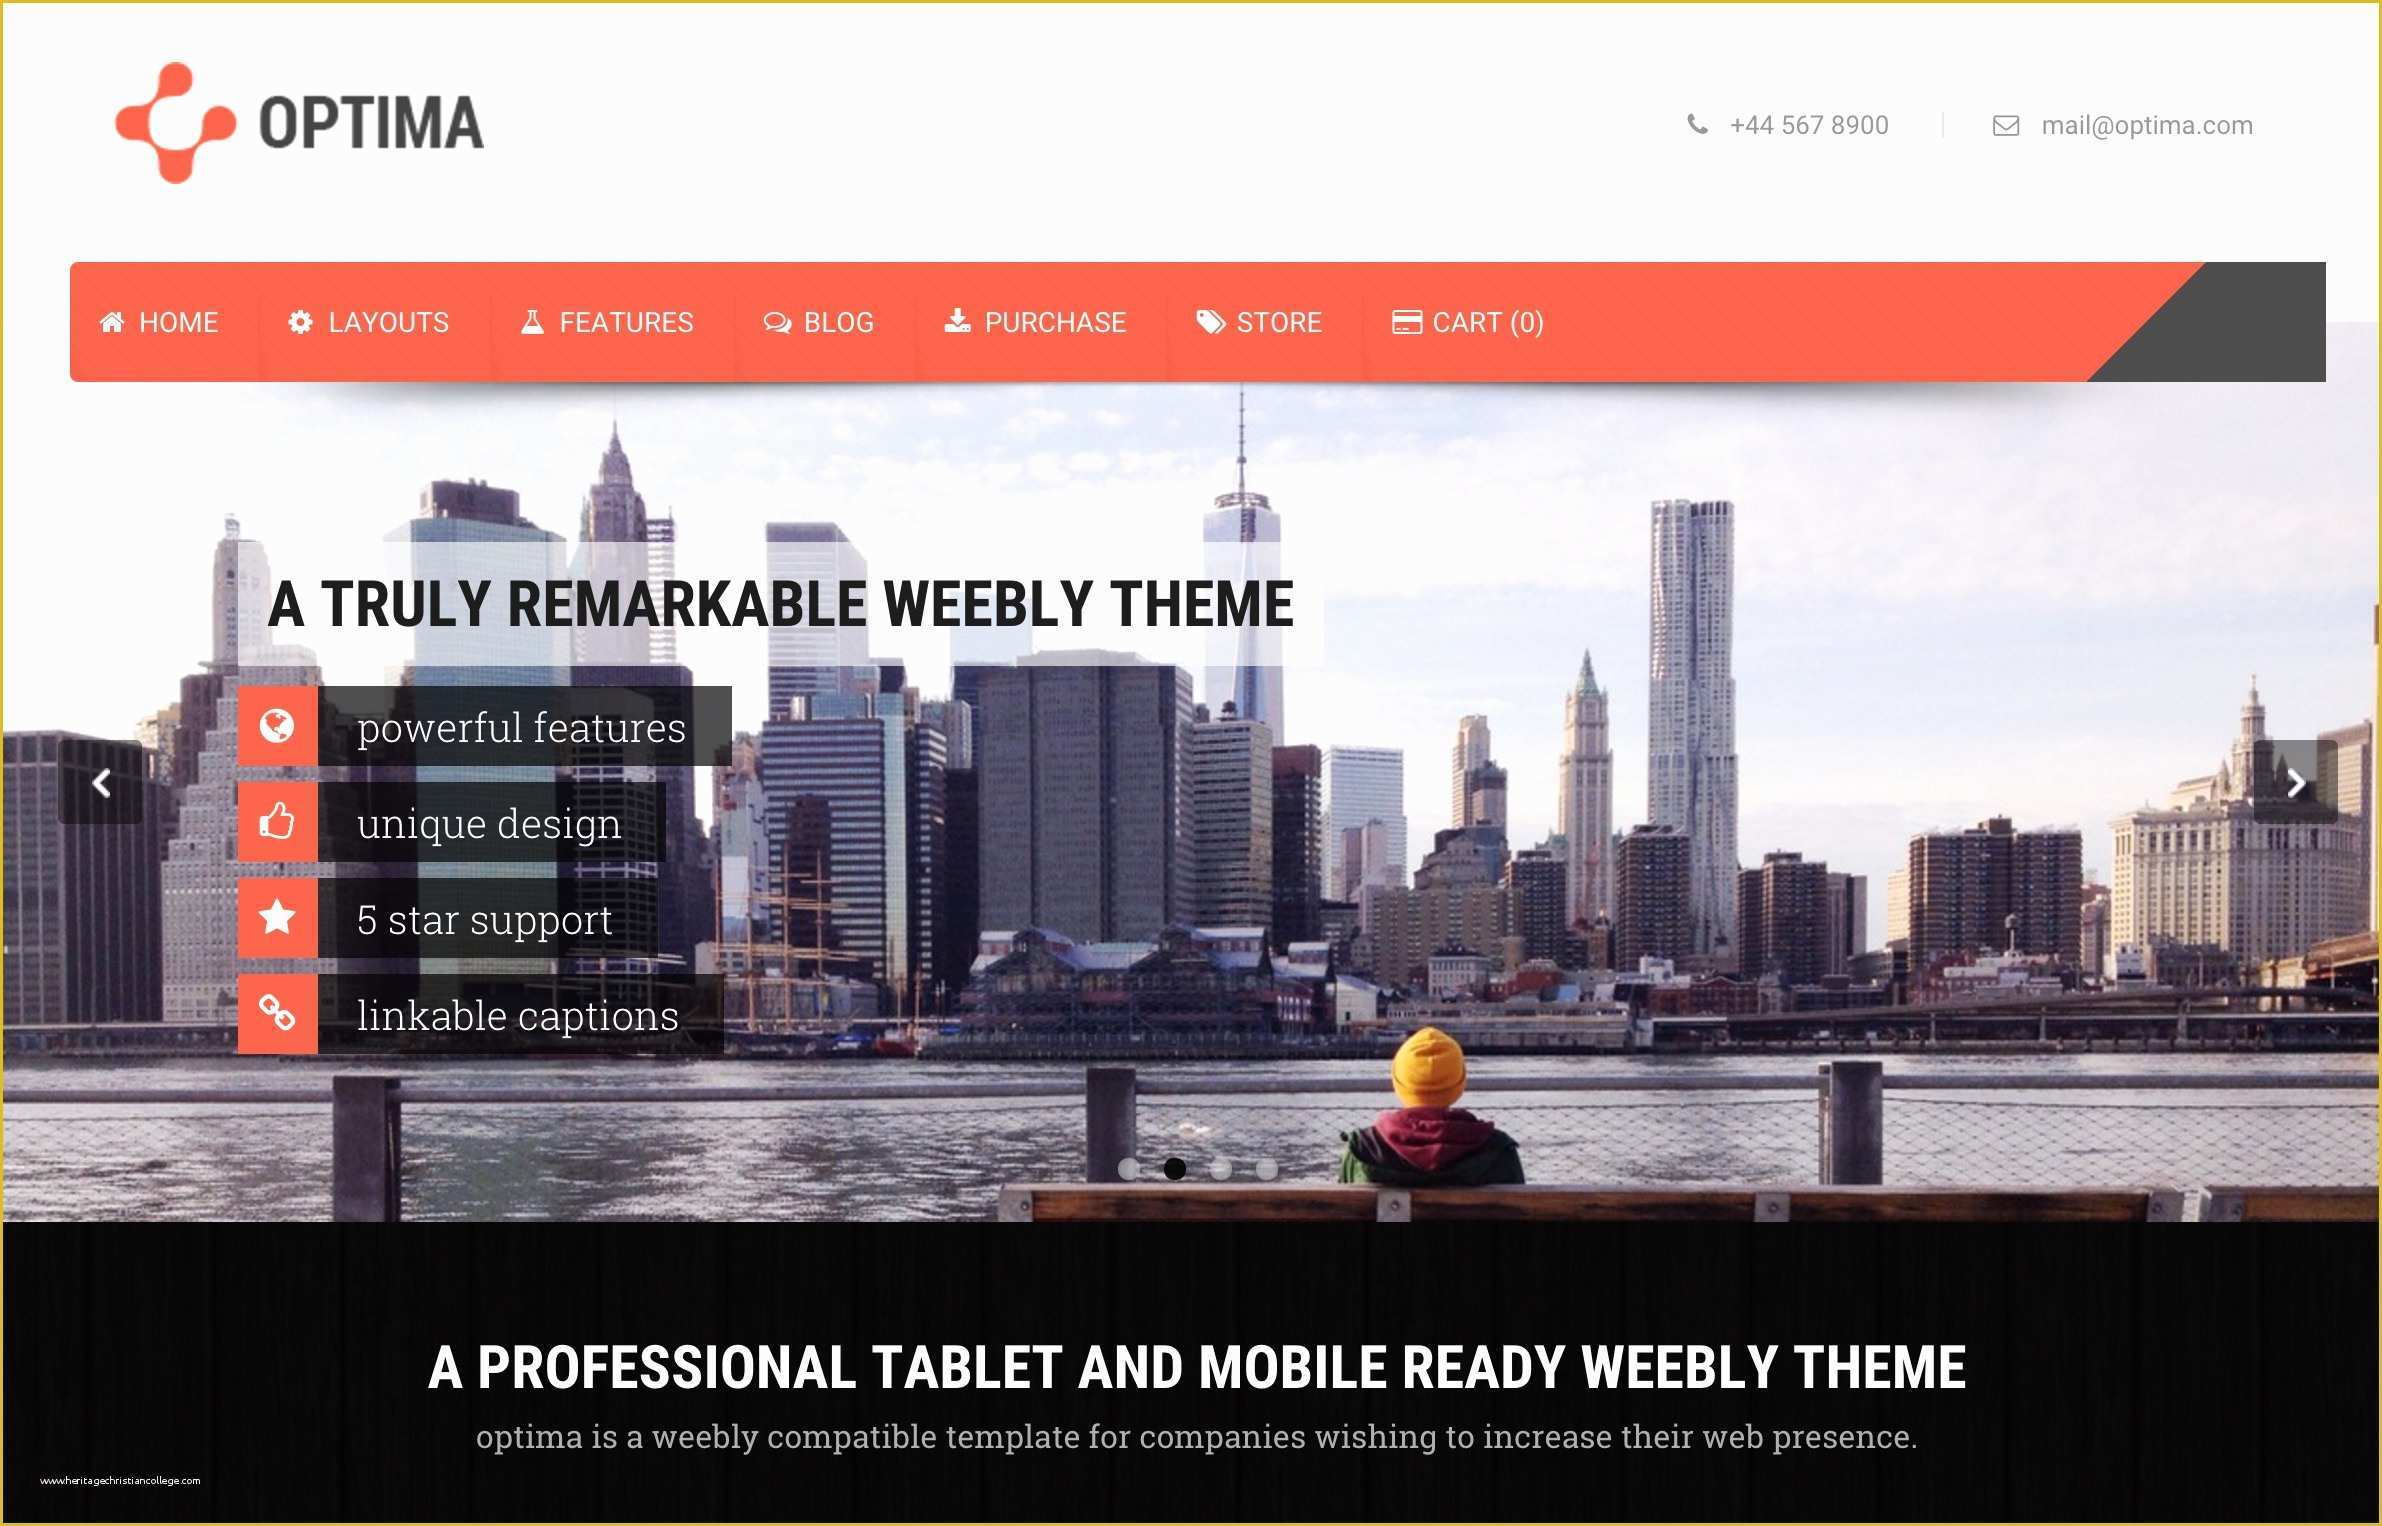 Free Weebly Templates Of 63 Weebly Templates and Designs for Advanced Websites